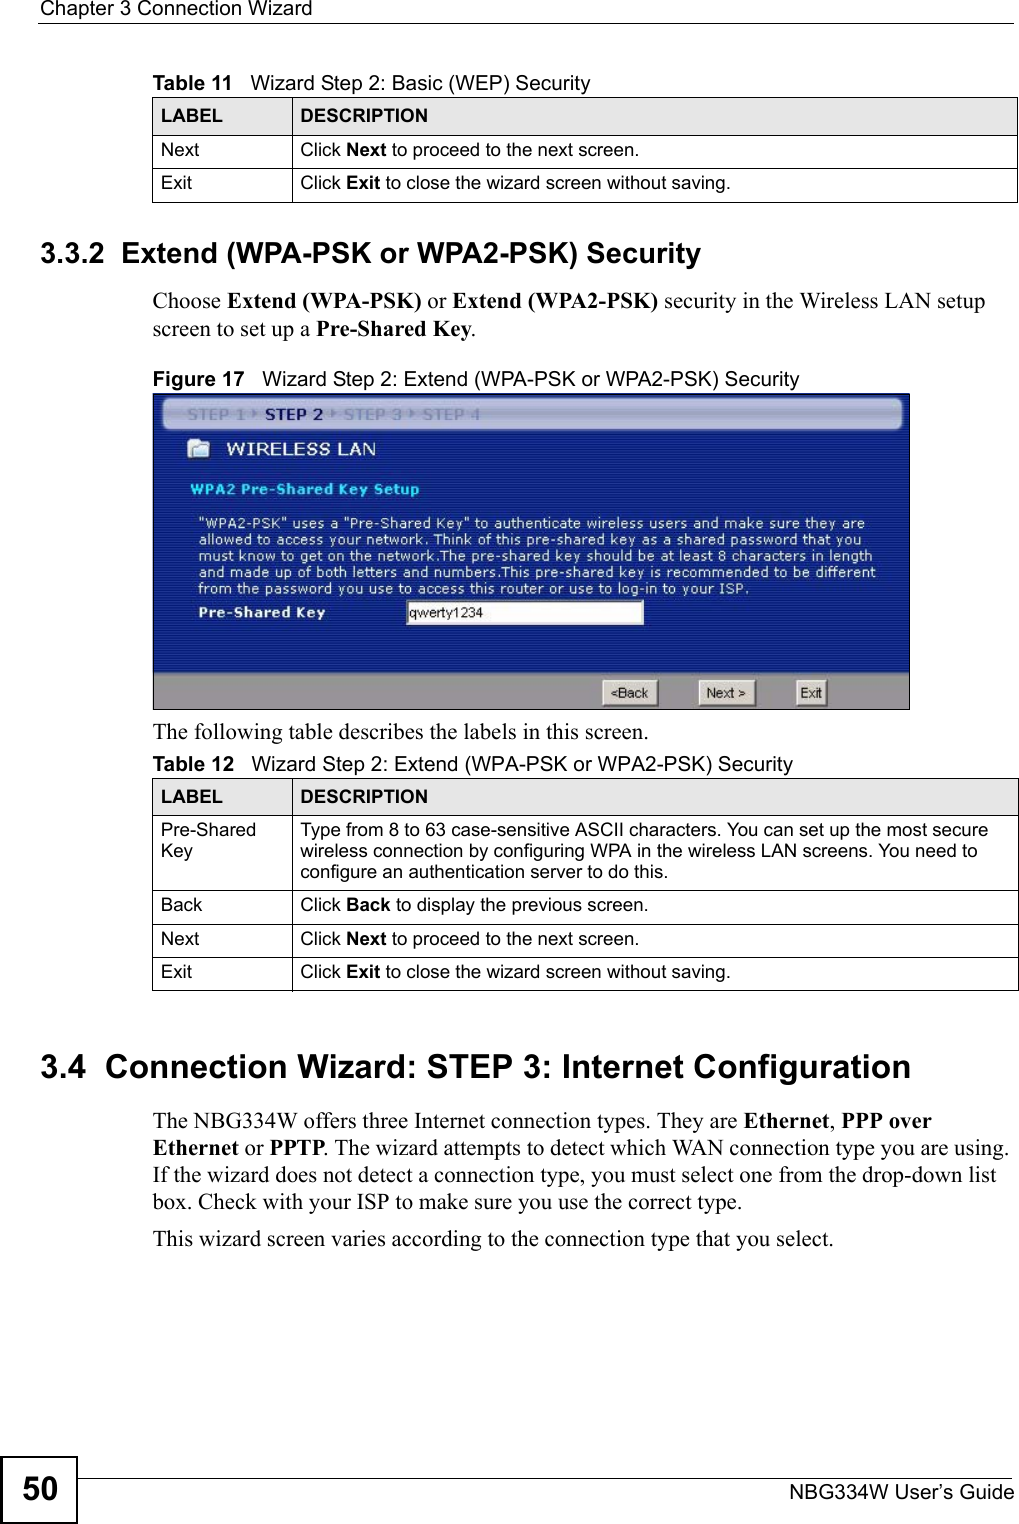 Chapter 3 Connection WizardNBG334W User’s Guide503.3.2  Extend (WPA-PSK or WPA2-PSK) SecurityChoose Extend (WPA-PSK) or Extend (WPA2-PSK) security in the Wireless LAN setup screen to set up a Pre-Shared Key.Figure 17   Wizard Step 2: Extend (WPA-PSK or WPA2-PSK) SecurityThe following table describes the labels in this screen. 3.4  Connection Wizard: STEP 3: Internet ConfigurationThe NBG334W offers three Internet connection types. They are Ethernet, PPP over Ethernet or PPTP. The wizard attempts to detect which WAN connection type you are using. If the wizard does not detect a connection type, you must select one from the drop-down list box. Check with your ISP to make sure you use the correct type.This wizard screen varies according to the connection type that you select.Next Click Next to proceed to the next screen. Exit Click Exit to close the wizard screen without saving.Table 11   Wizard Step 2: Basic (WEP) SecurityLABEL DESCRIPTIONTable 12   Wizard Step 2: Extend (WPA-PSK or WPA2-PSK) SecurityLABEL DESCRIPTIONPre-Shared KeyType from 8 to 63 case-sensitive ASCII characters. You can set up the most secure wireless connection by configuring WPA in the wireless LAN screens. You need to configure an authentication server to do this.Back Click Back to display the previous screen.Next Click Next to proceed to the next screen. Exit Click Exit to close the wizard screen without saving.